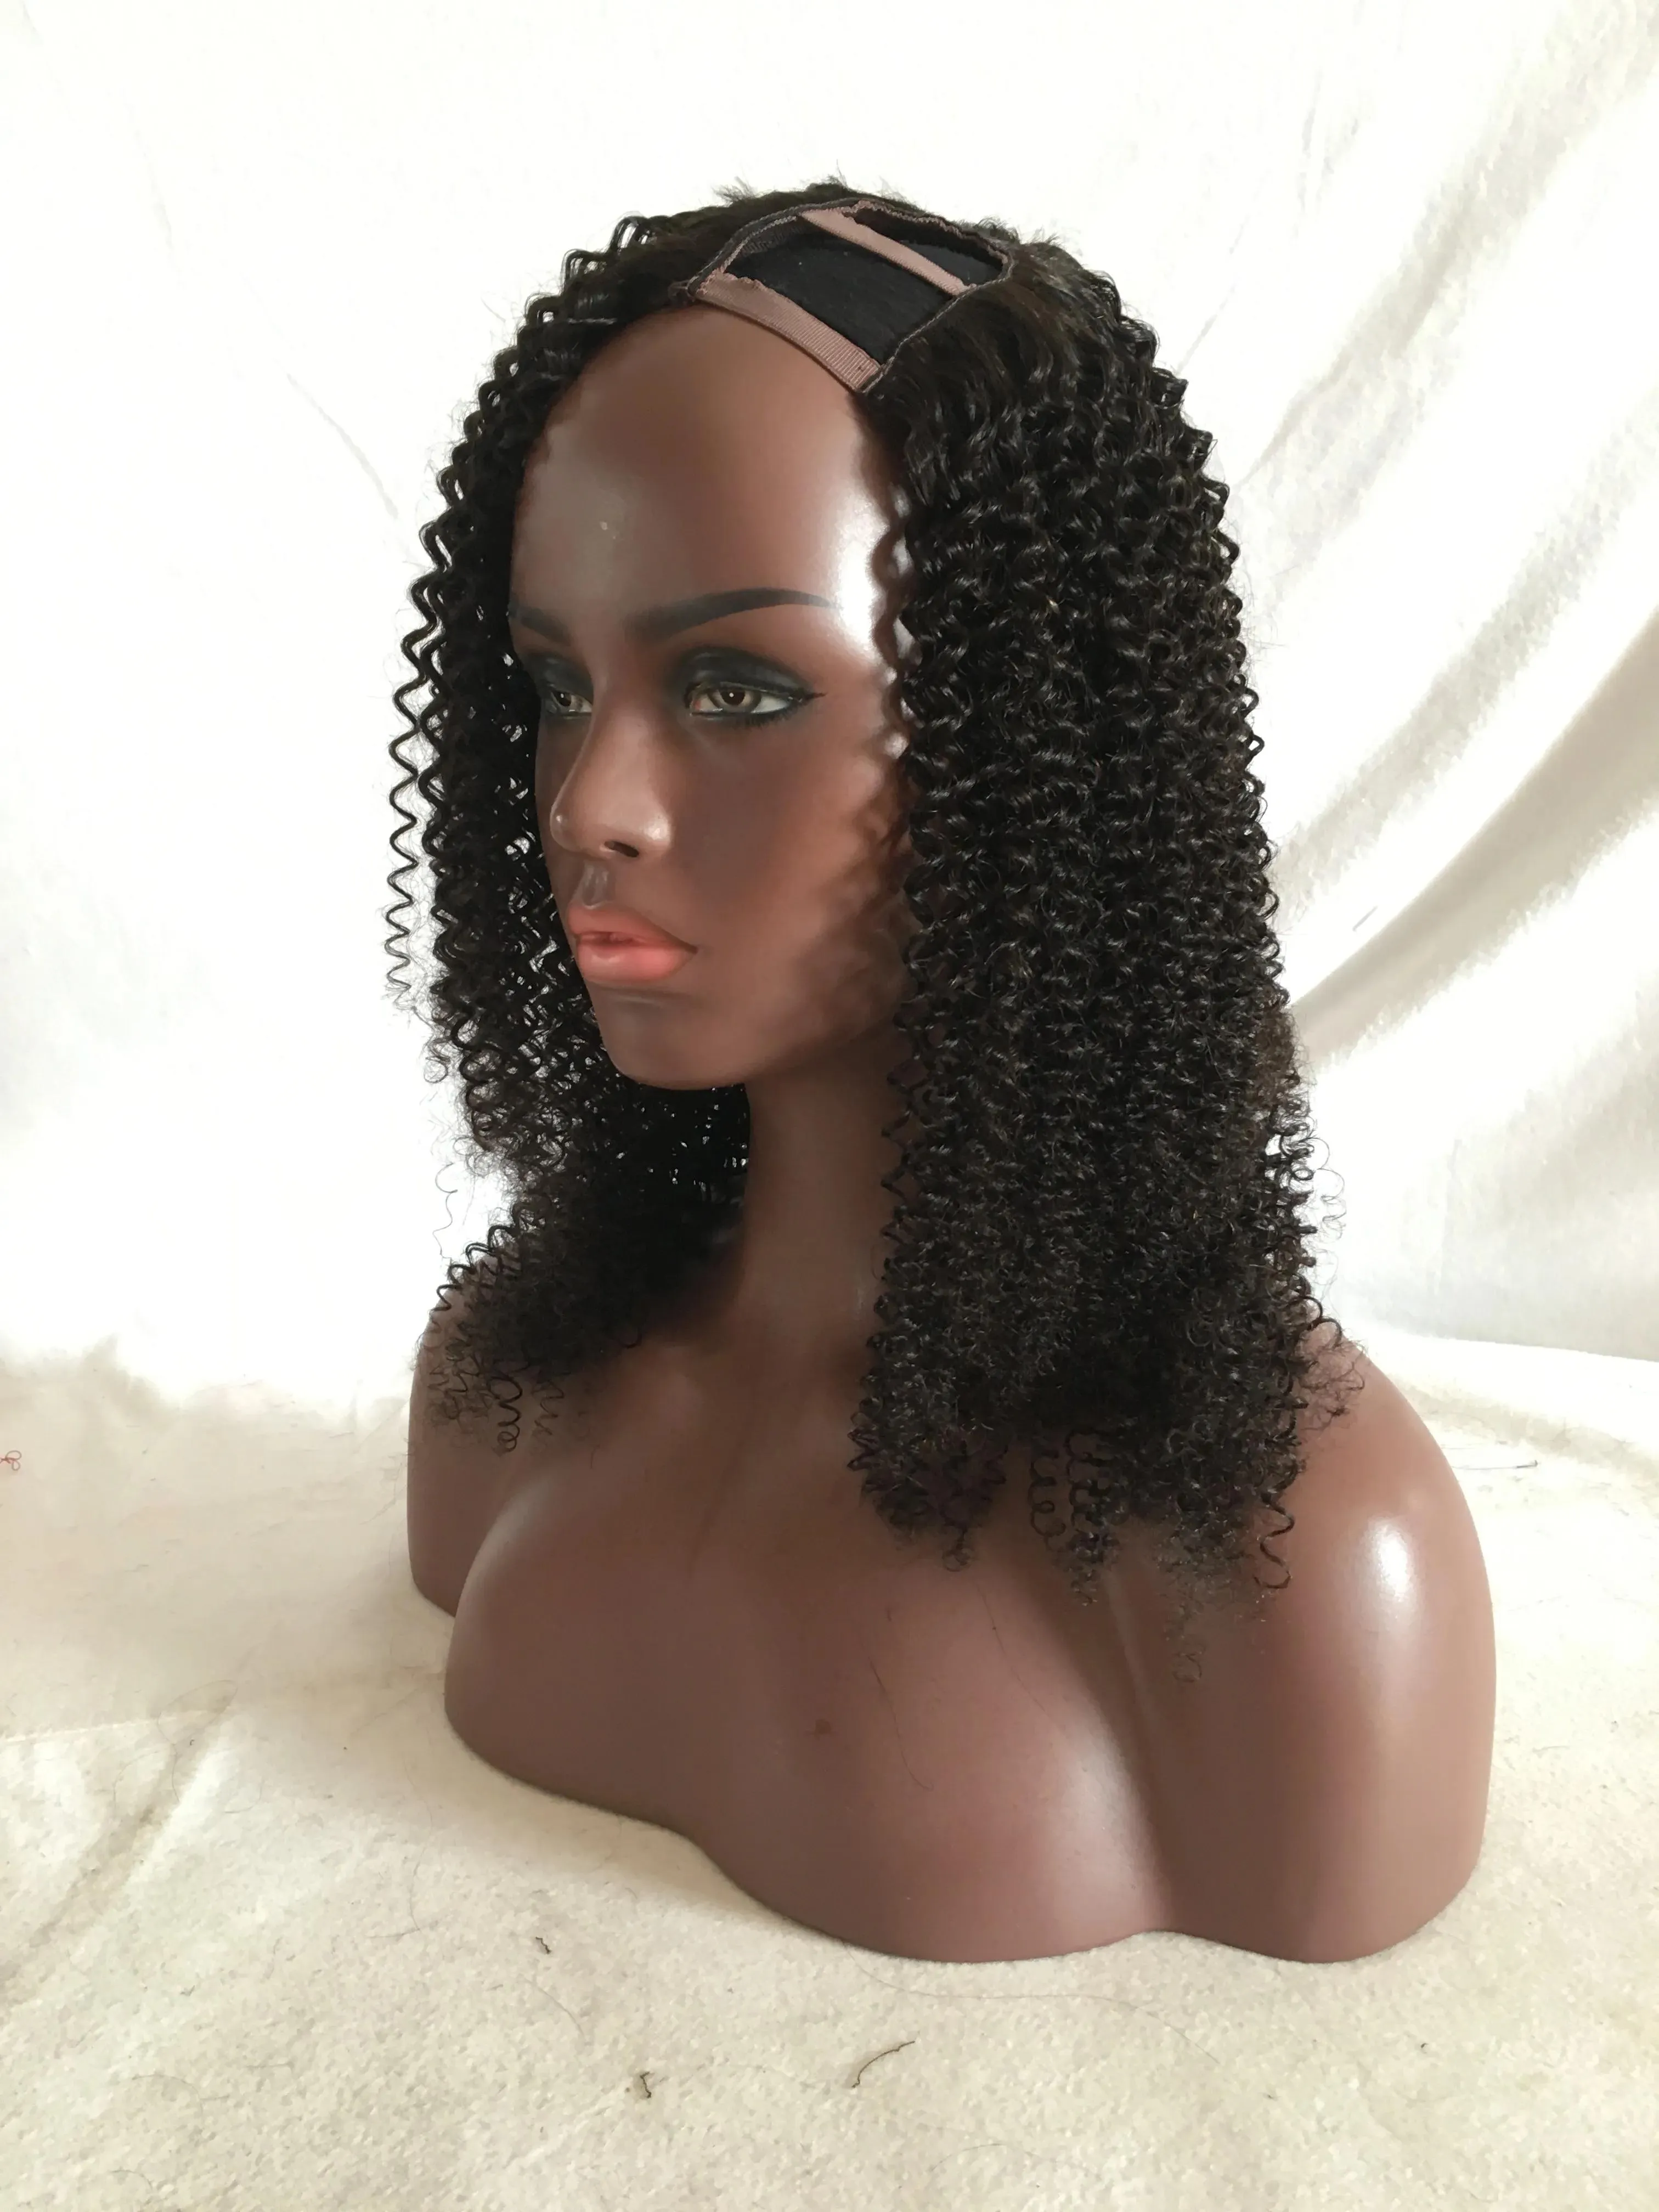 Wigs 1x3/2x4/4x4 824inch Kinky Curl Human Hair Peruvian Virgin Hair Middle/left/Right U Part Lace Wigs For Black Women